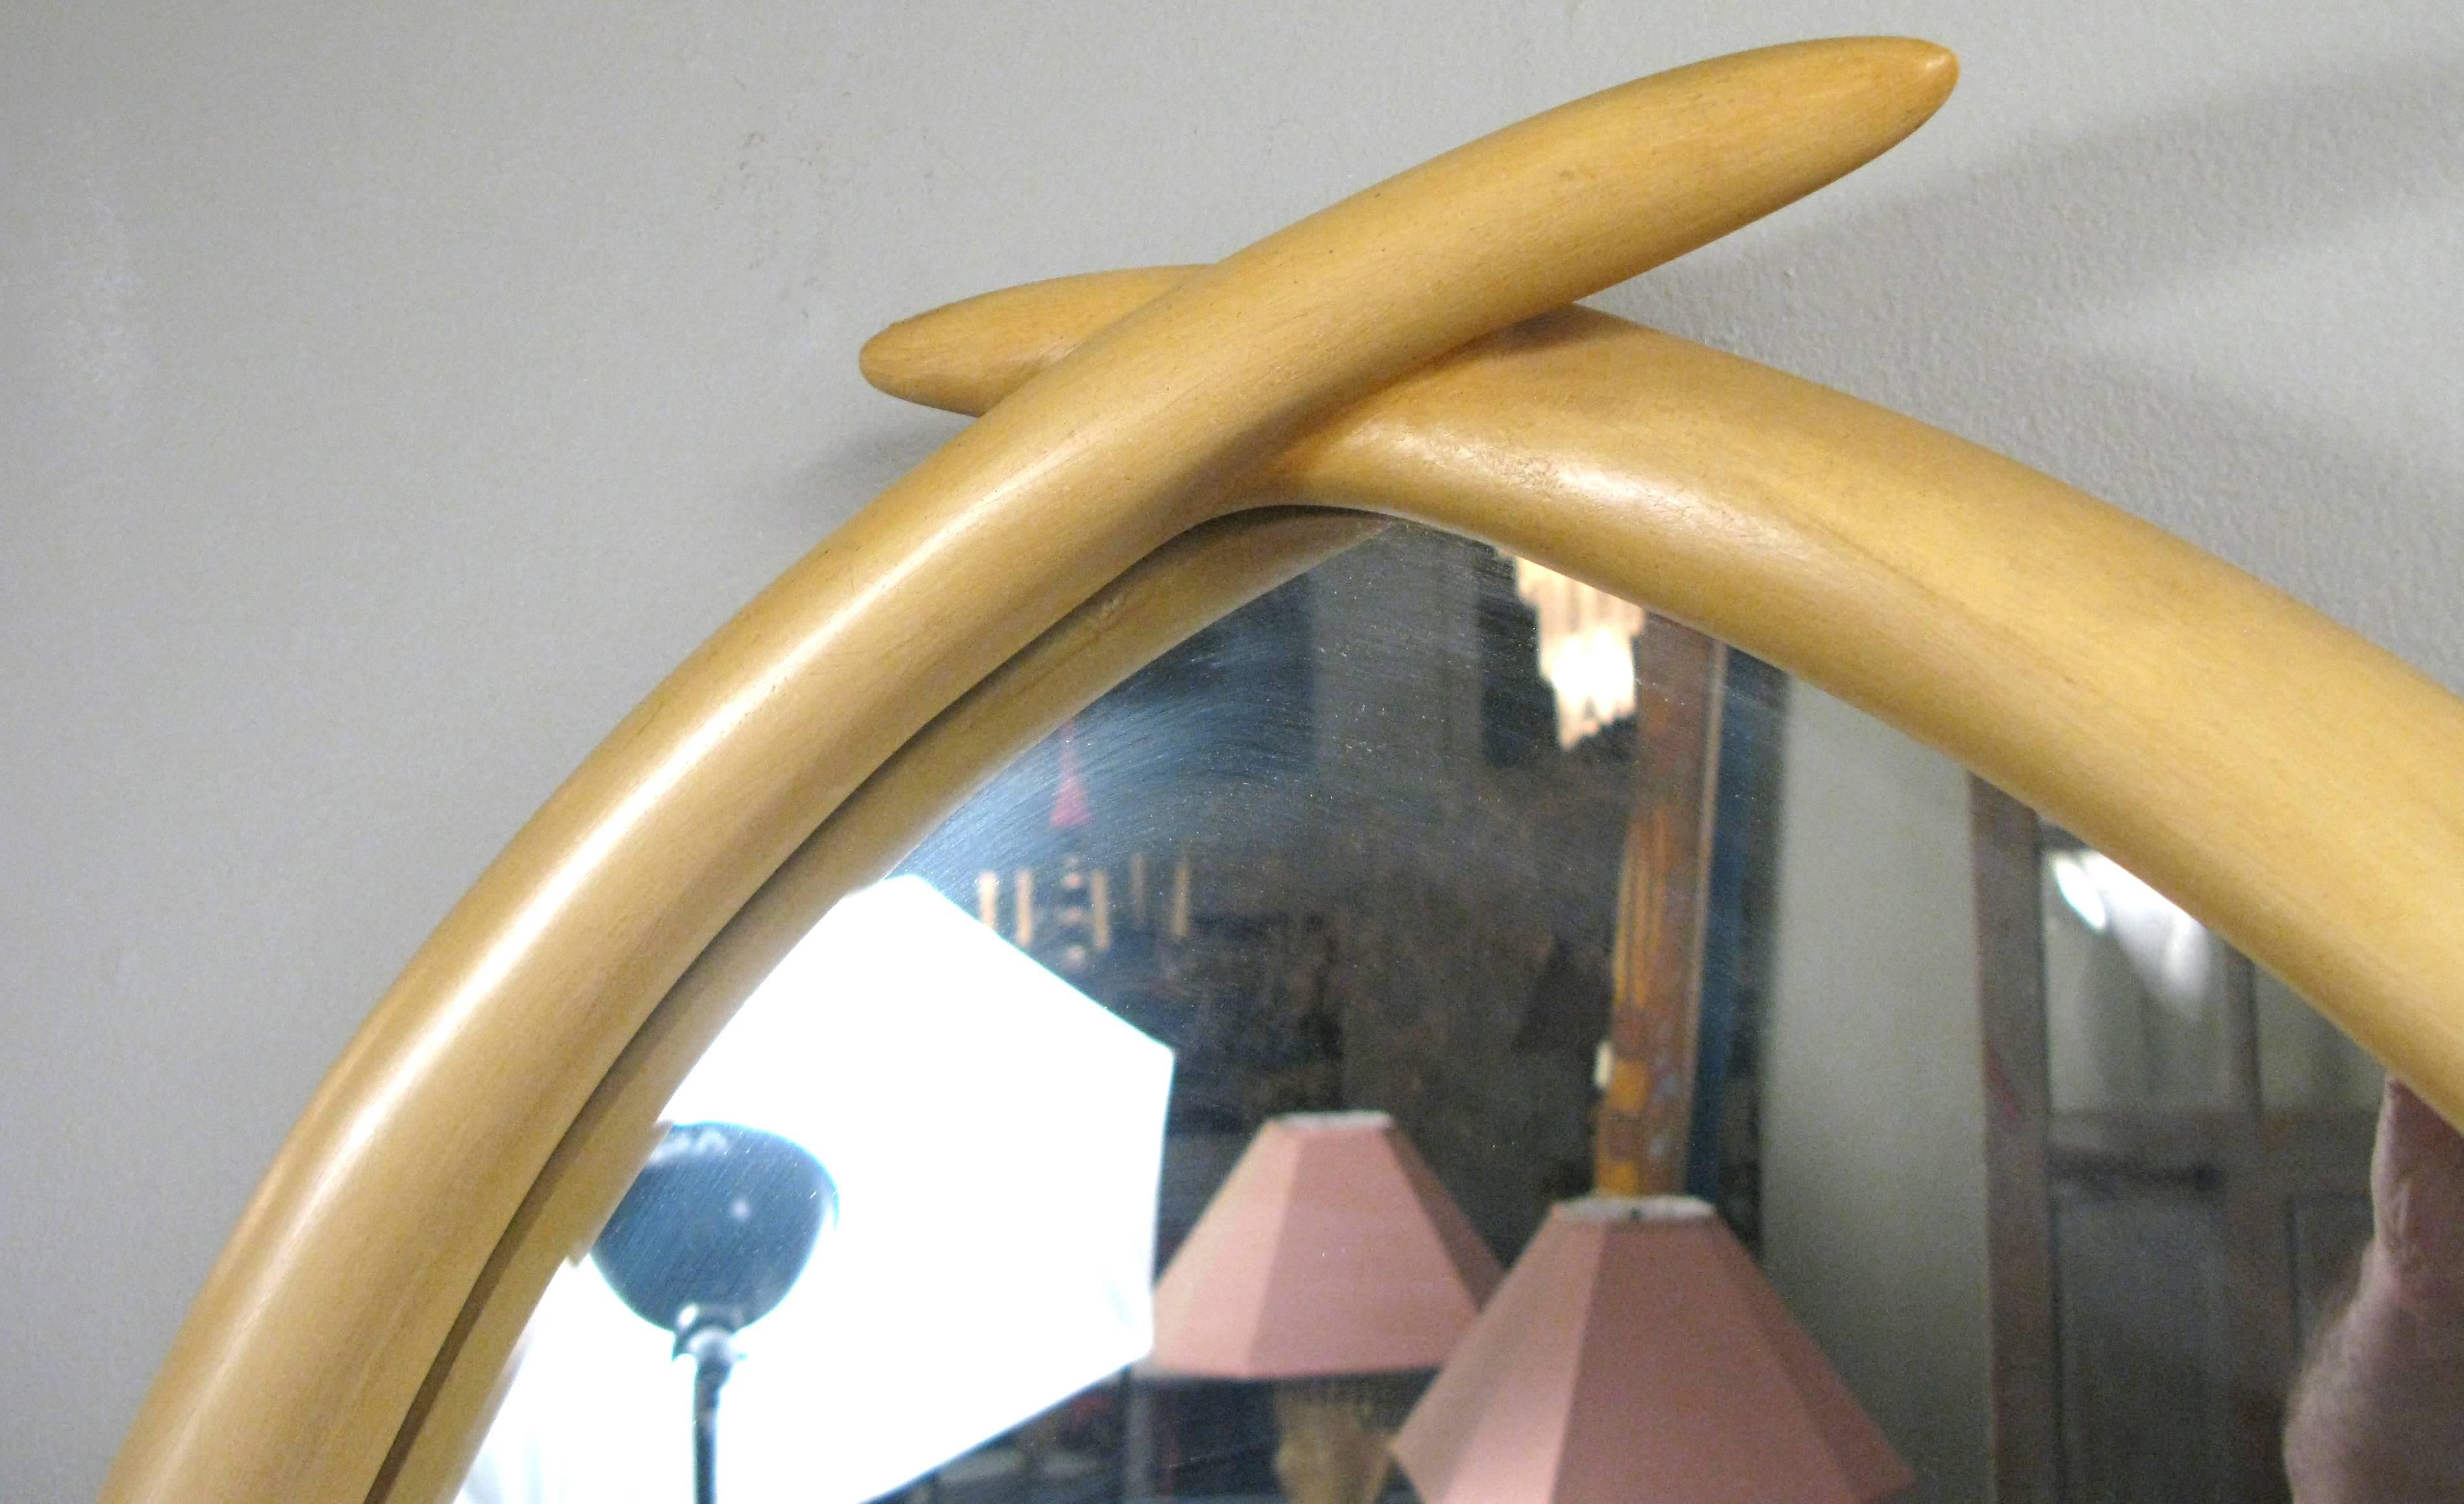 Wonderful vintage 1970s mirror by Chapman in the form of crossed elephant tusks with patinated brass bands on the sides. Great form and character.